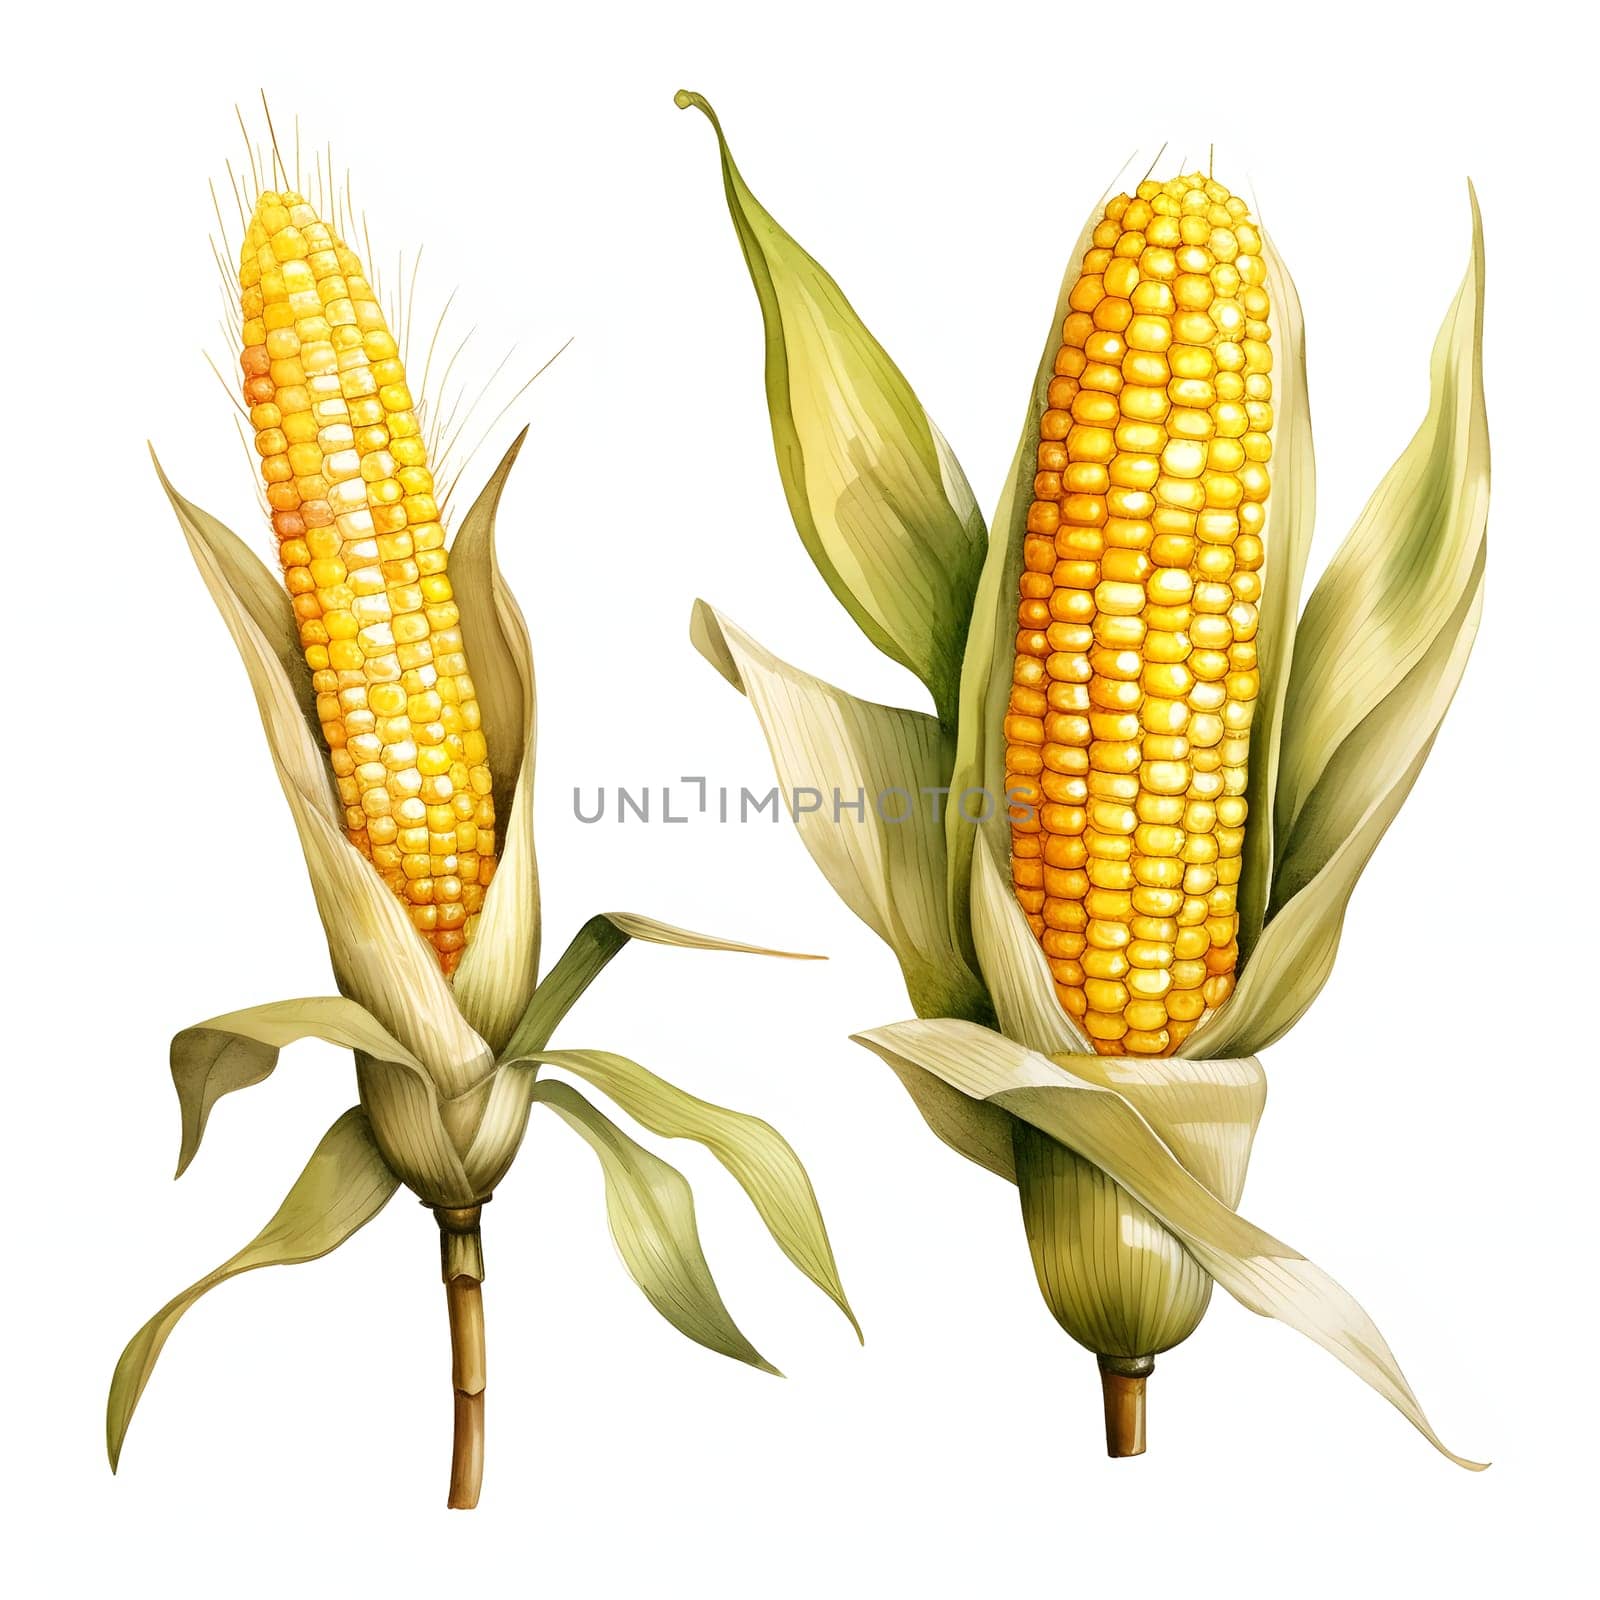 Illustration of two corn cobs in leaves, one thick, the other thin. Corn as a dish of thanksgiving for the harvest, picture on a white isolated background. An atmosphere of joy and celebration.